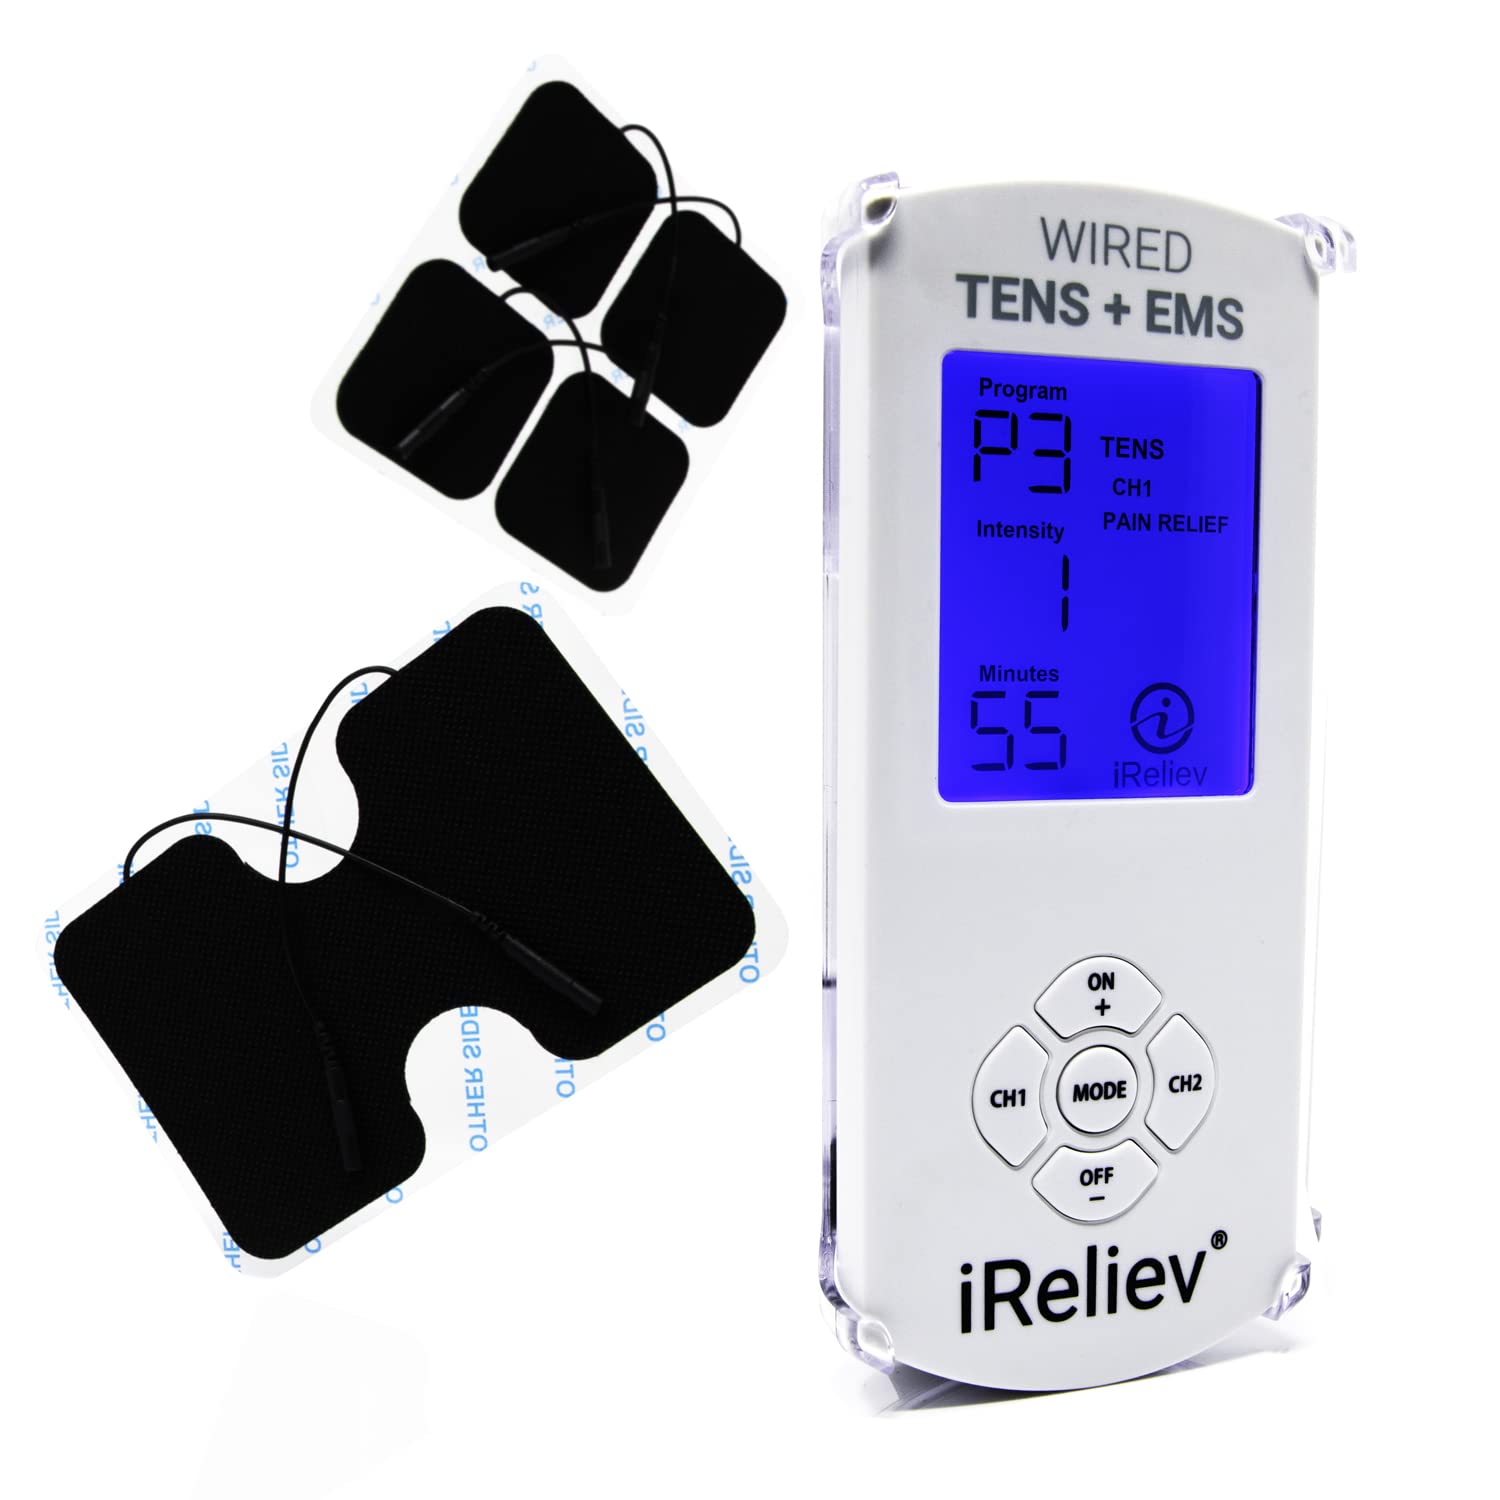 TENS Unit EMS Muscle Stimulator by iReliev: Comes with 14 Therapy Modes  Premium Pain Relief and Recovery System Rechargeable Large Back Lit Display  Large and Small Electrode Pads